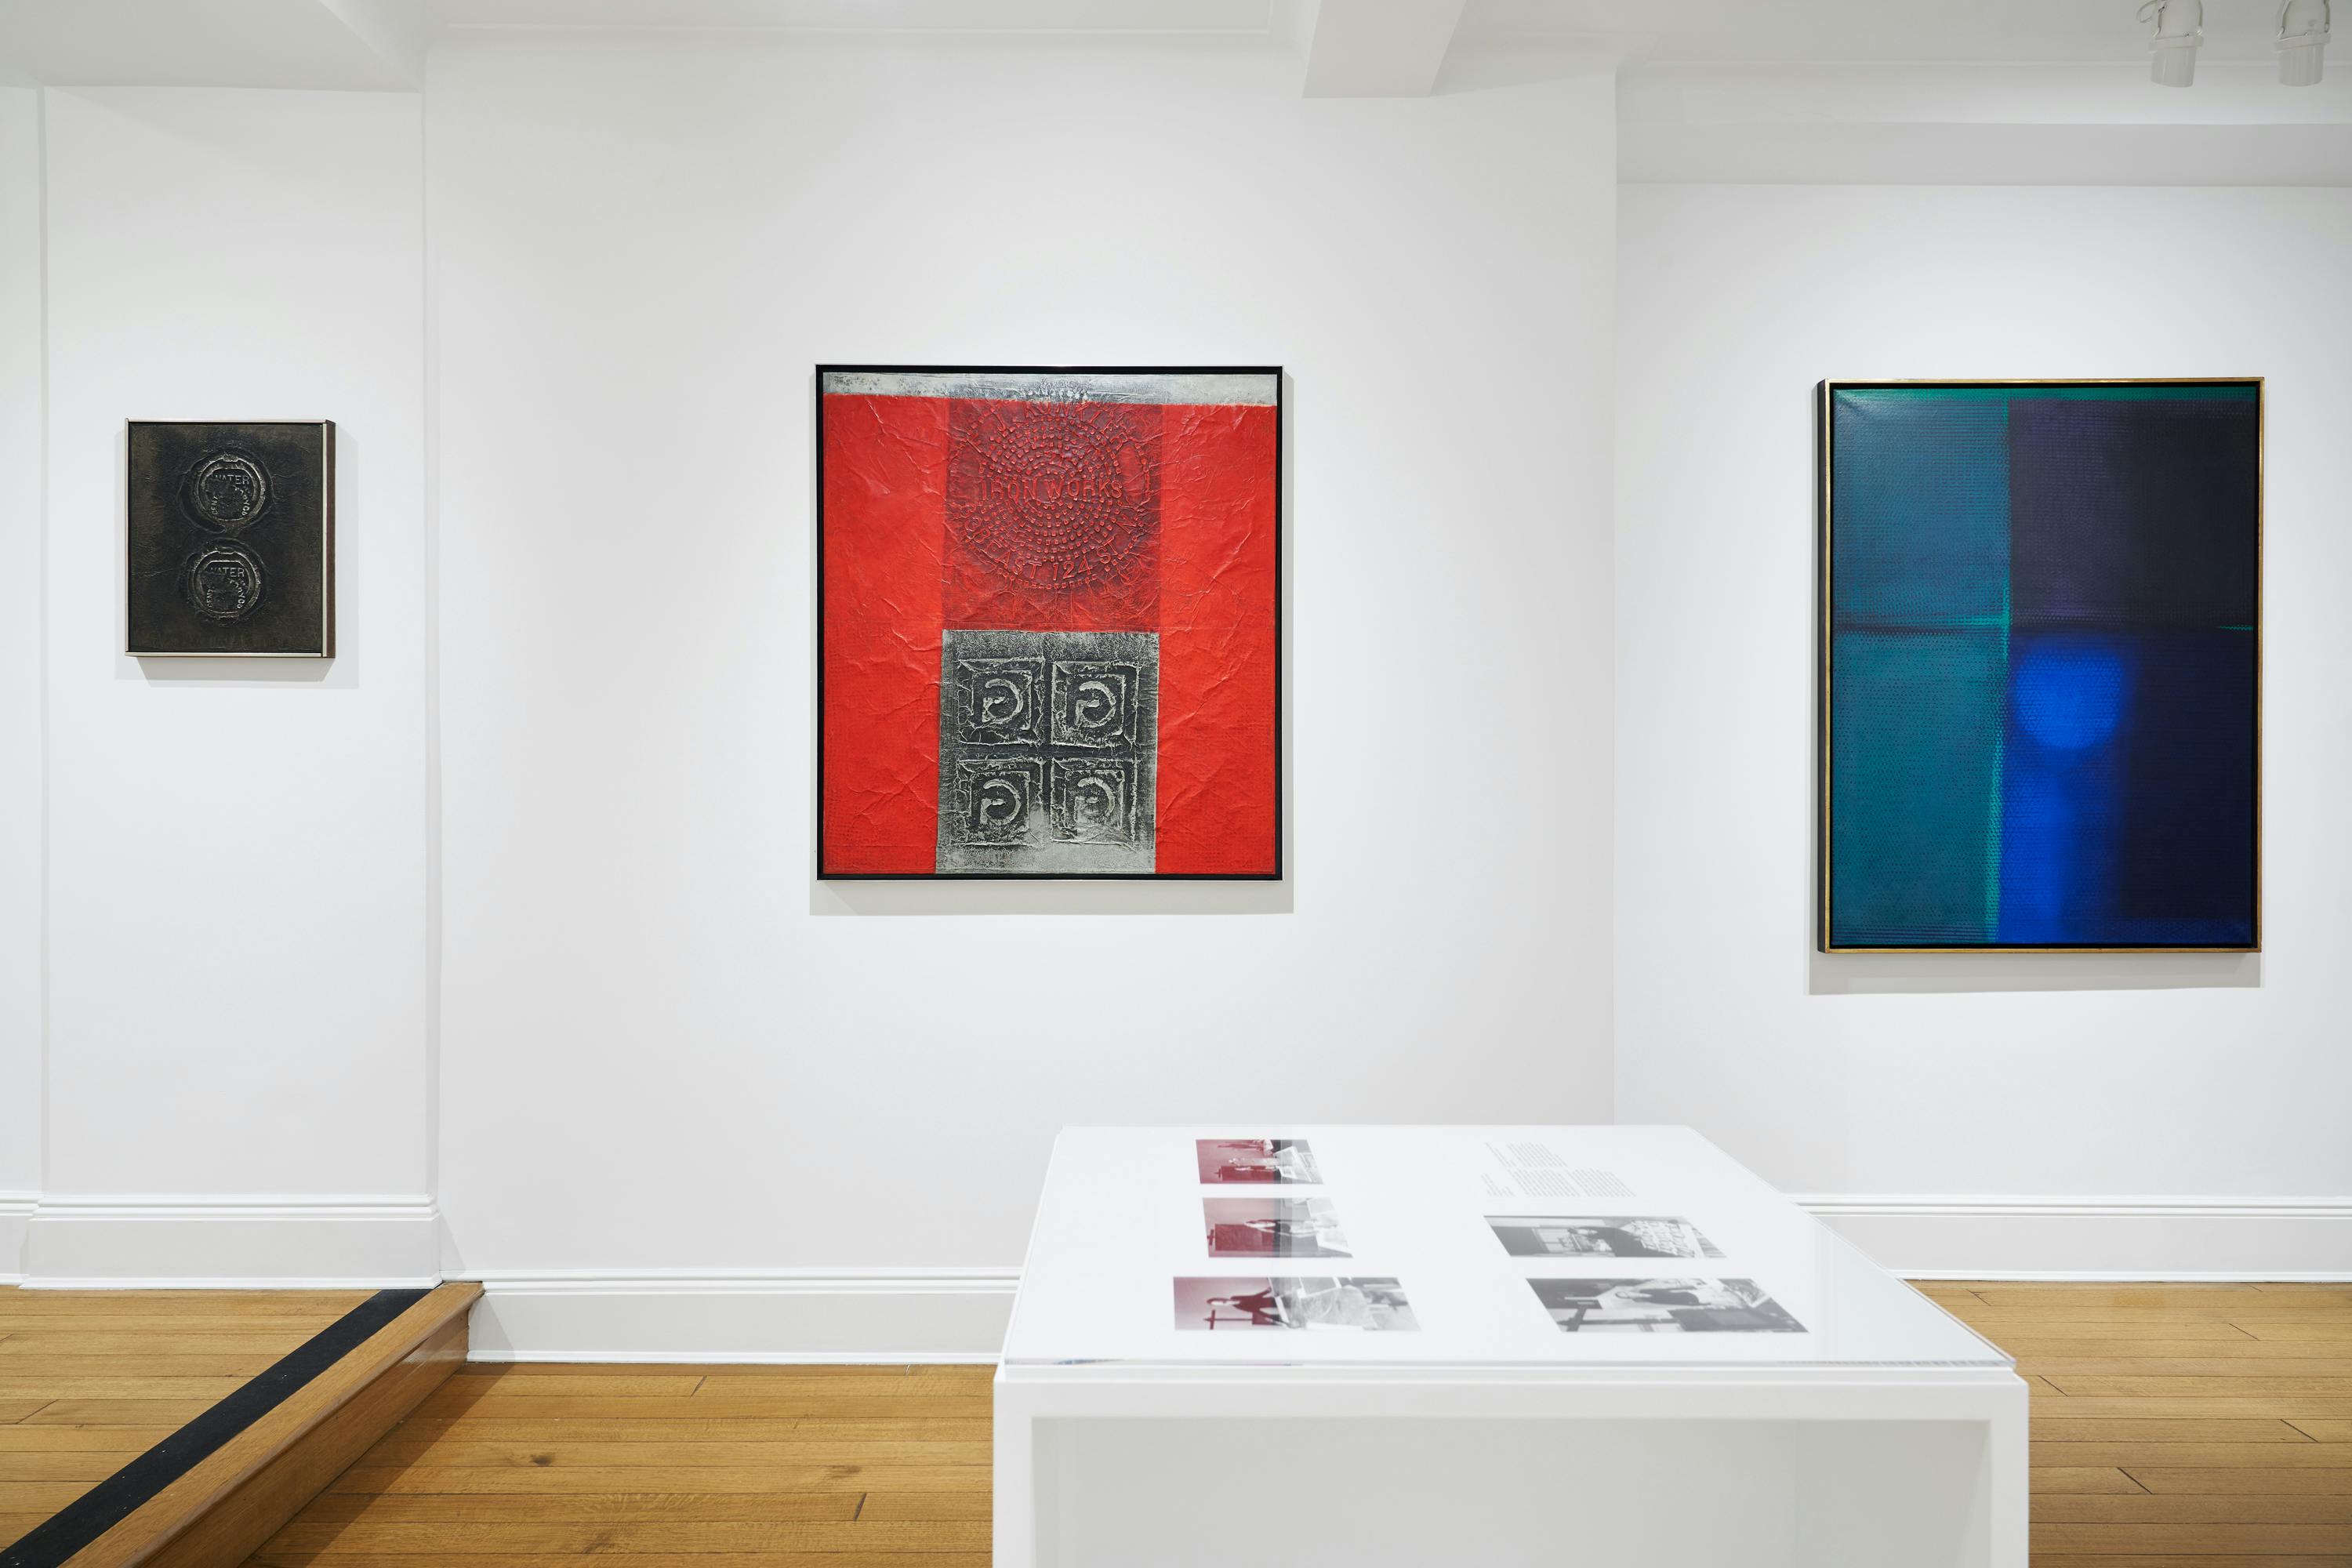 Installation view of a vitrine and three aluminum foil works by José Antonio Fernández-Muro.